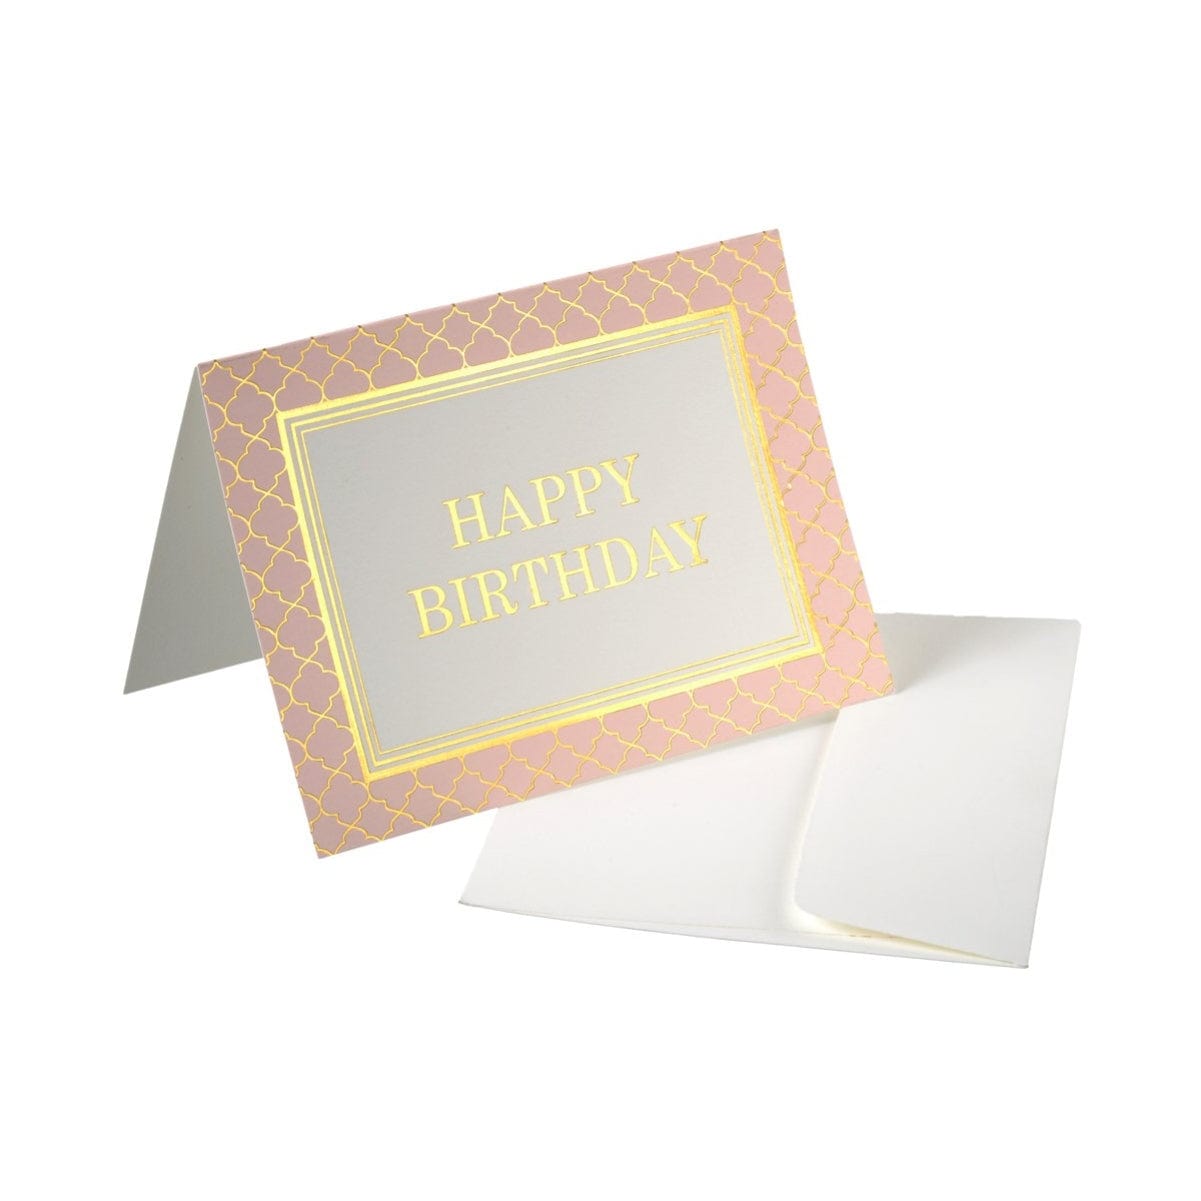 Gifts of Love Regalia Greeting Cards Happy Birthday